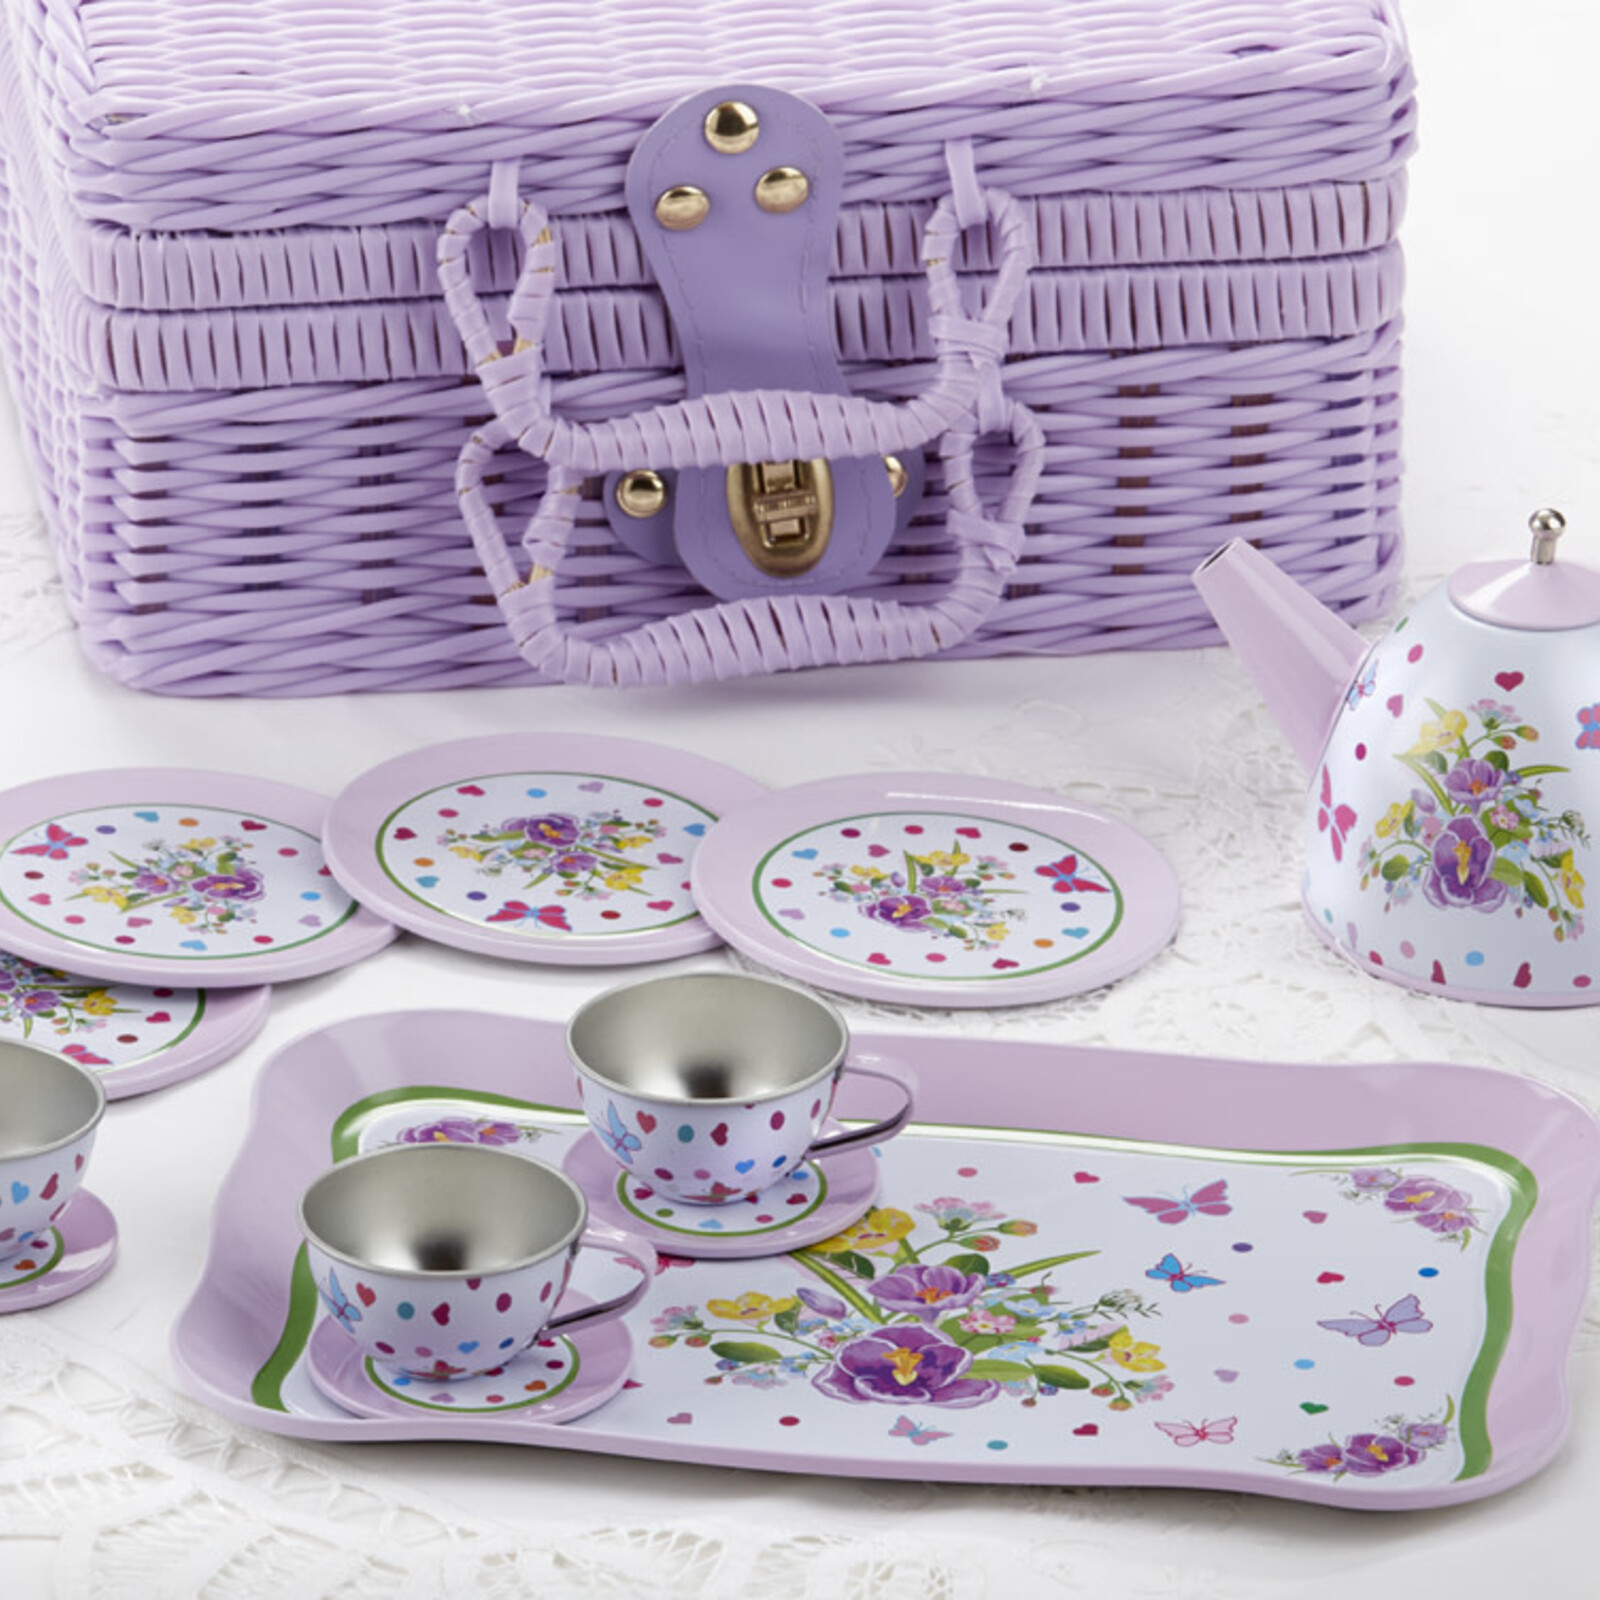 Delton Products 4" Tin 15 Pc Tea Set in Basket, Pansy  8000-7 loading=